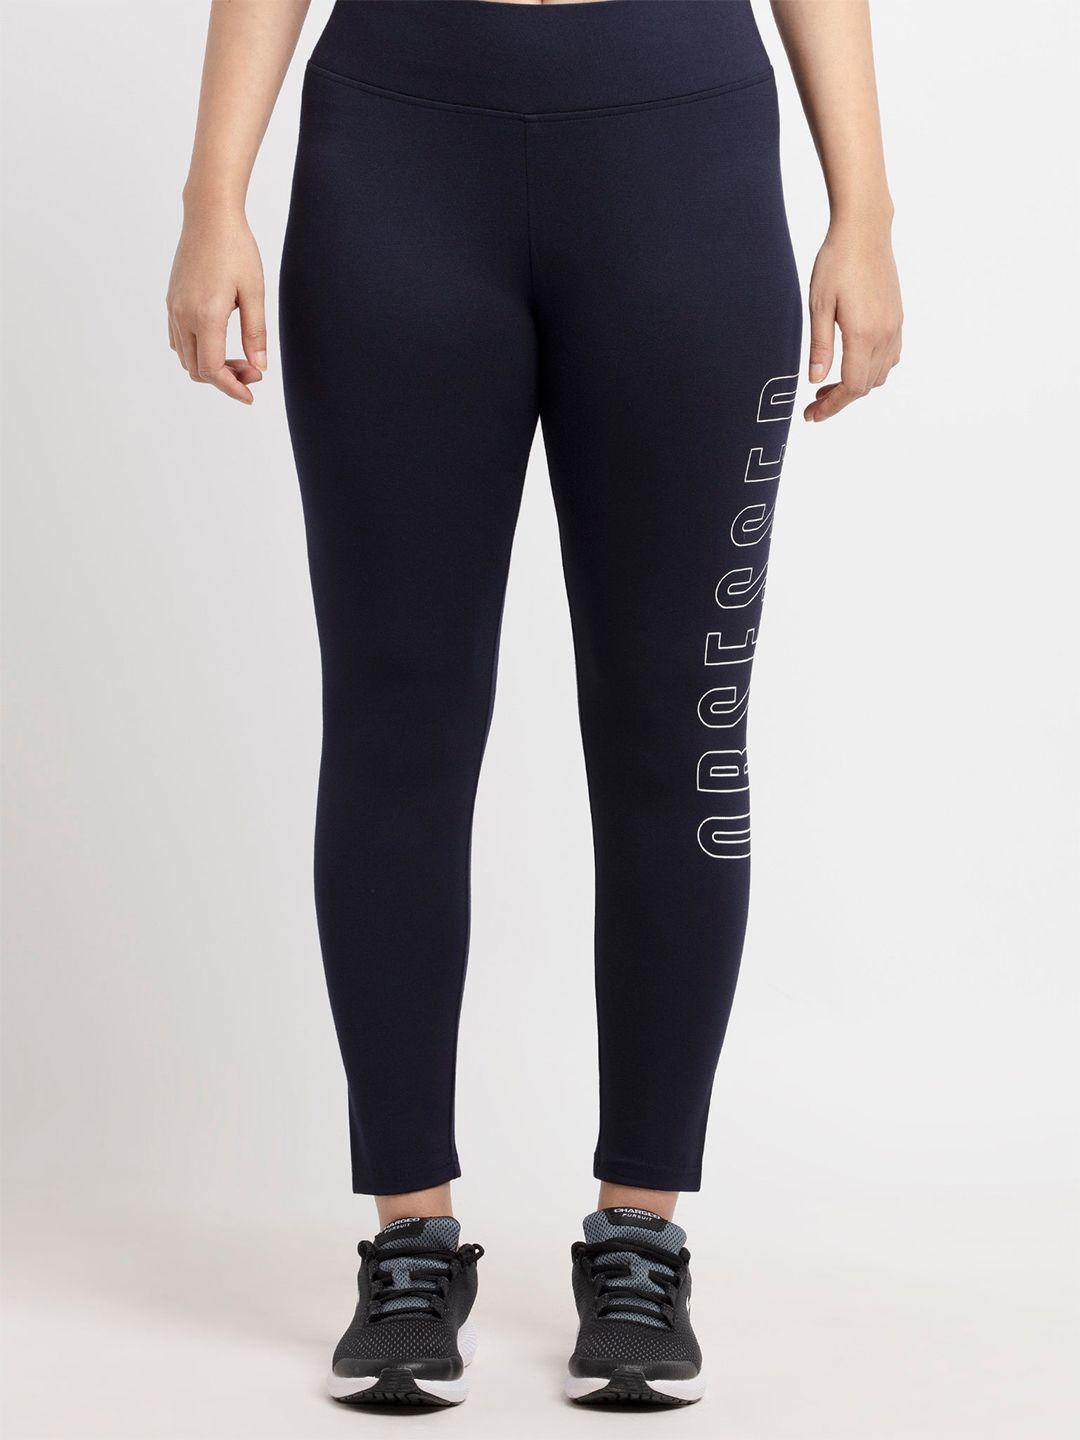 status-quo-women-navy-blue-side-printed-high-rise-jeggings